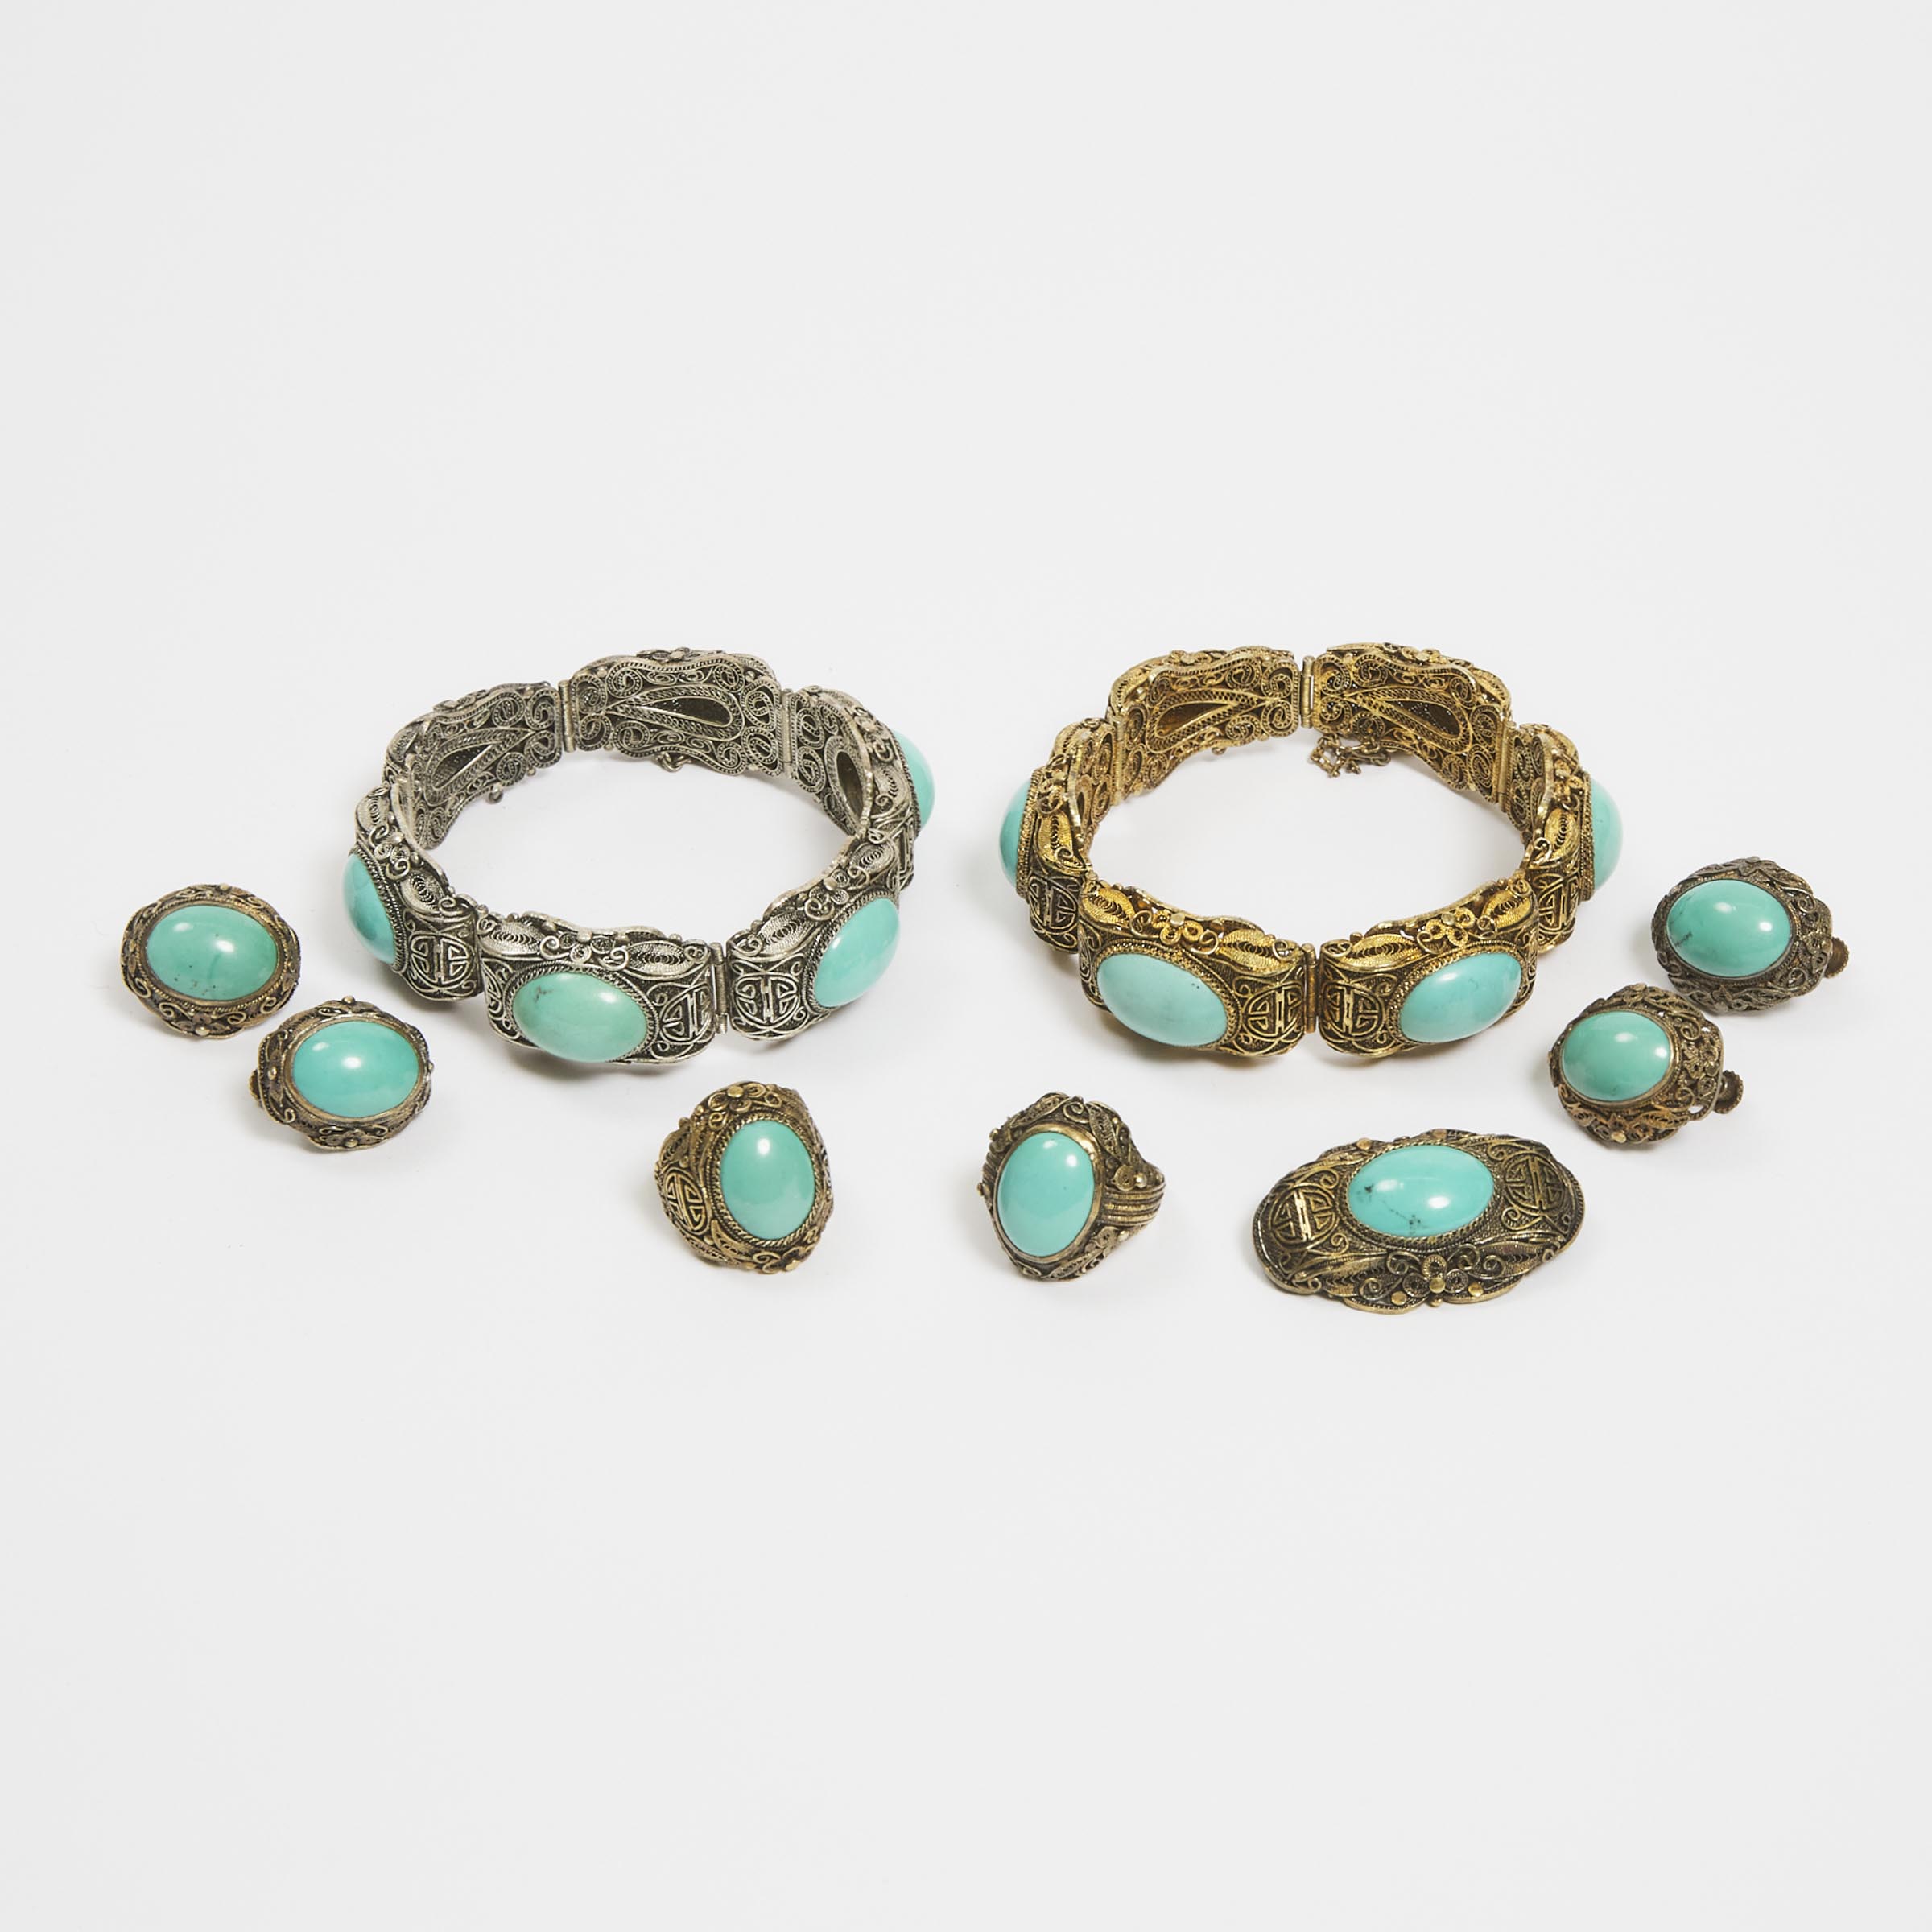 Two Sets of Nine Chinese Silver-Gilt Filigree and Turquoise-Inlaid Jewellery Set, Republican Period (1912-1949)